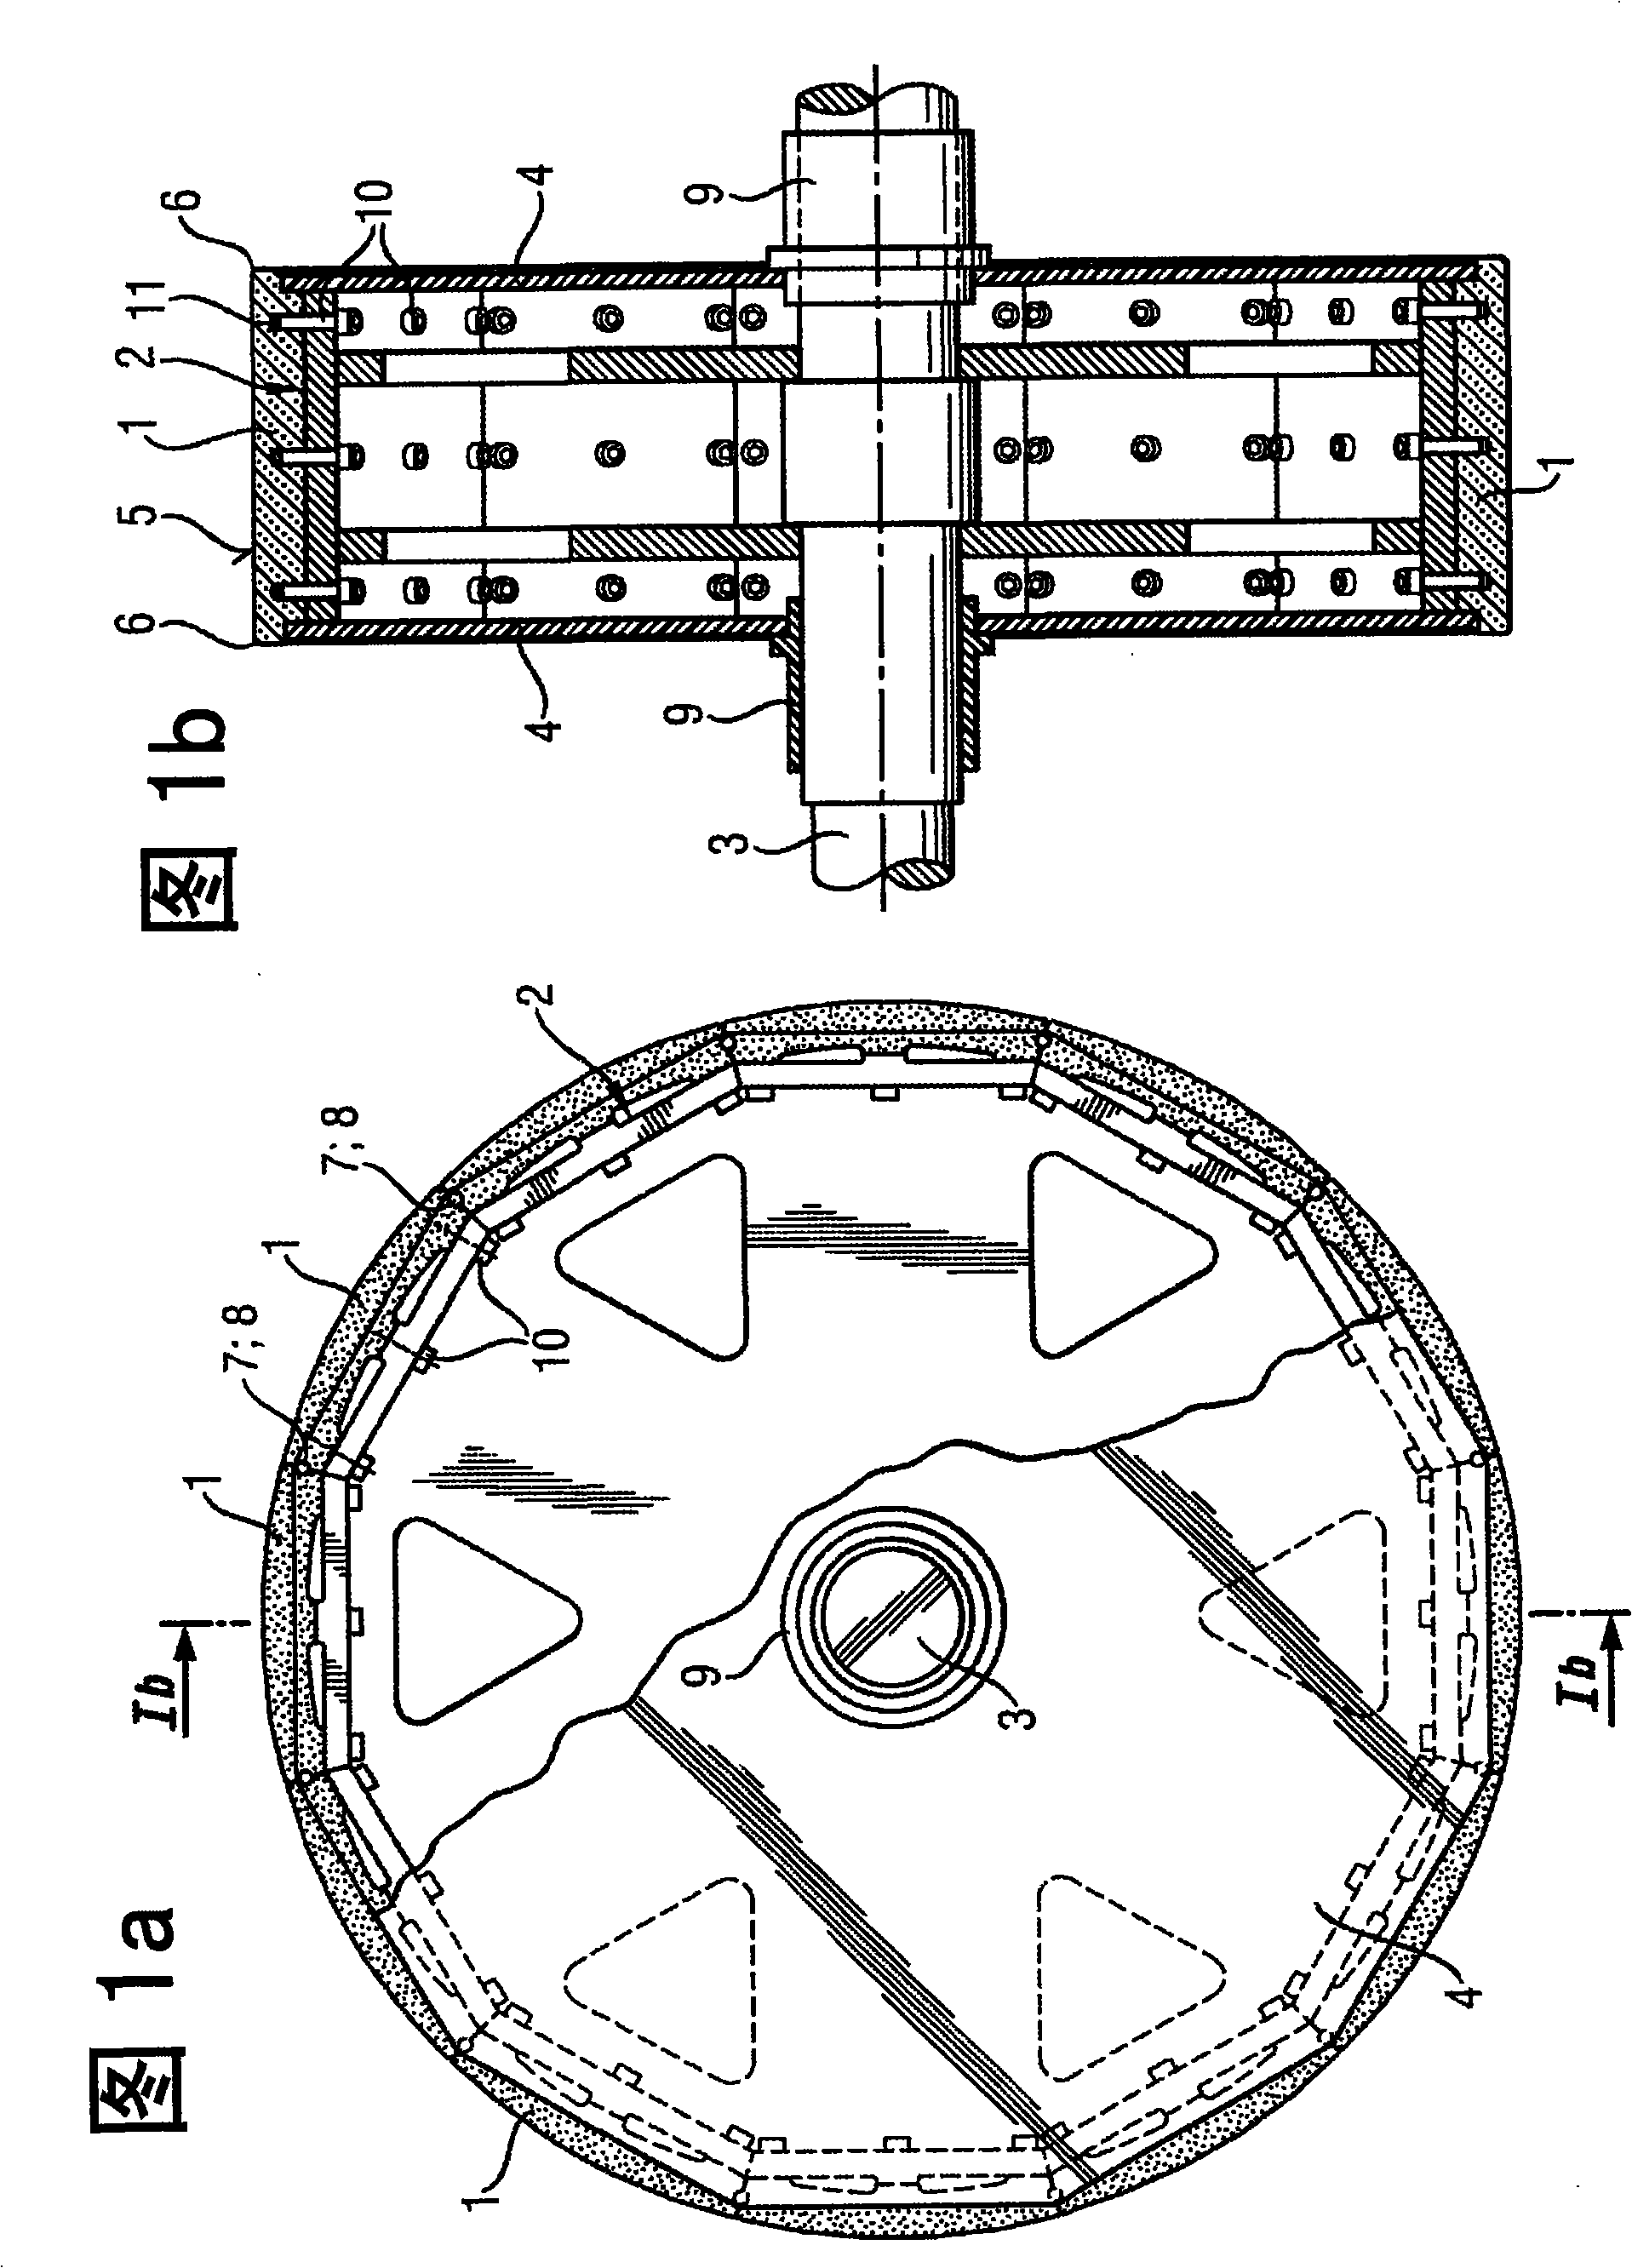 Device and method for comminuting coarsely crushed polycrystalline silicon